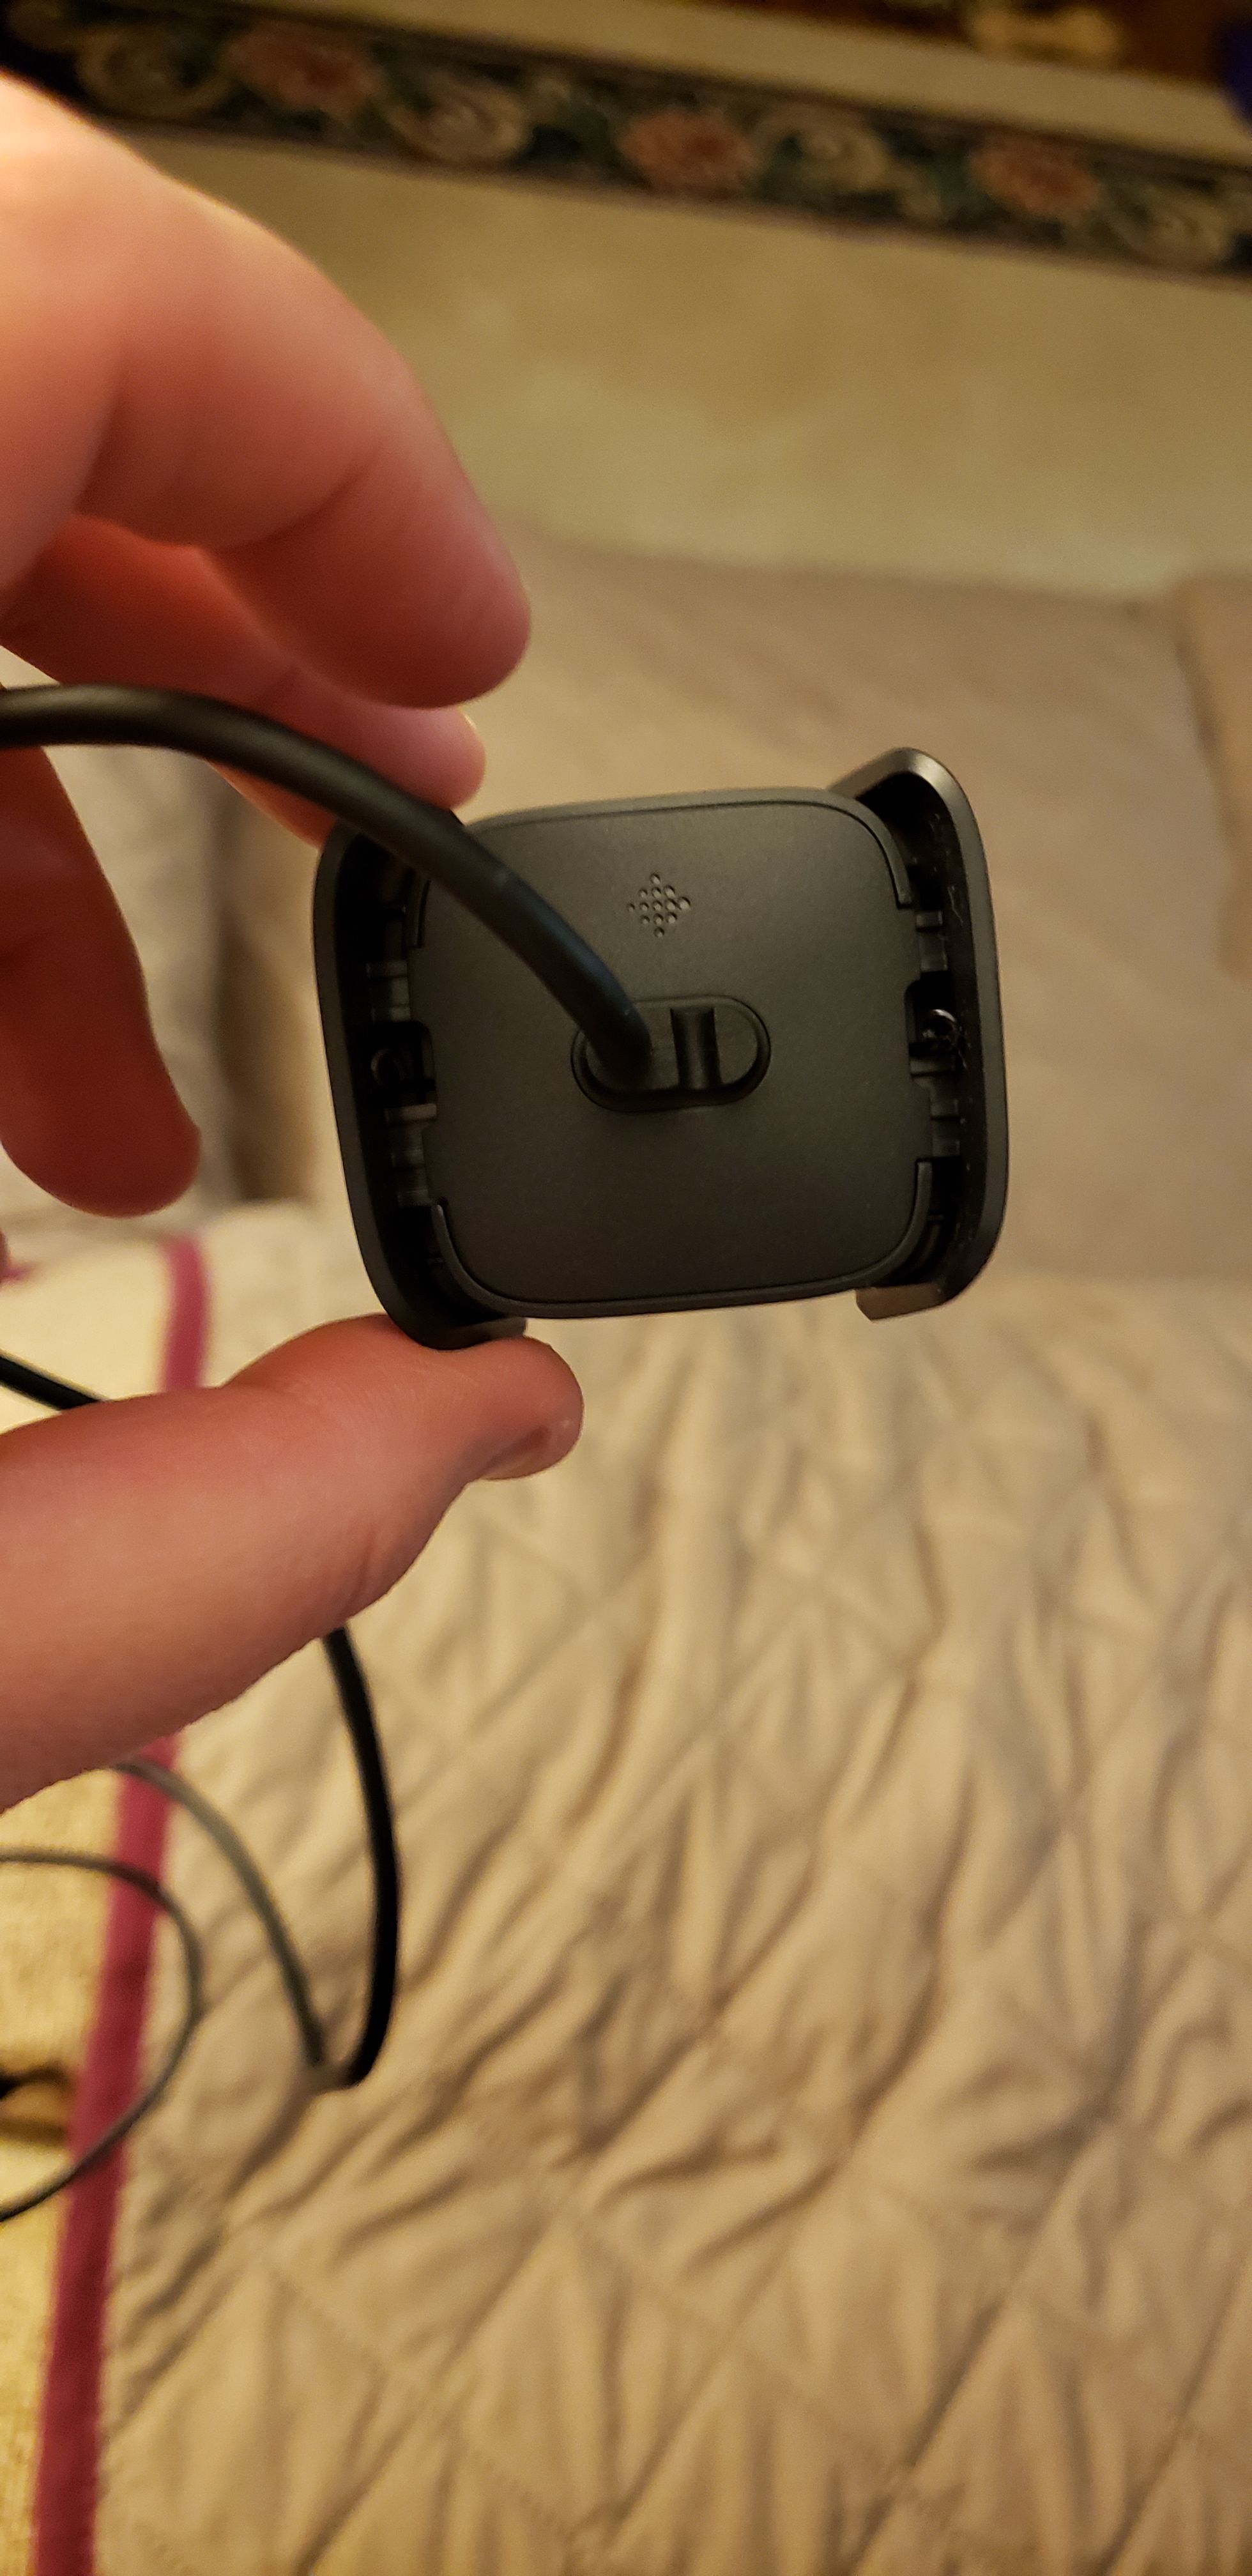 charger for versa lite